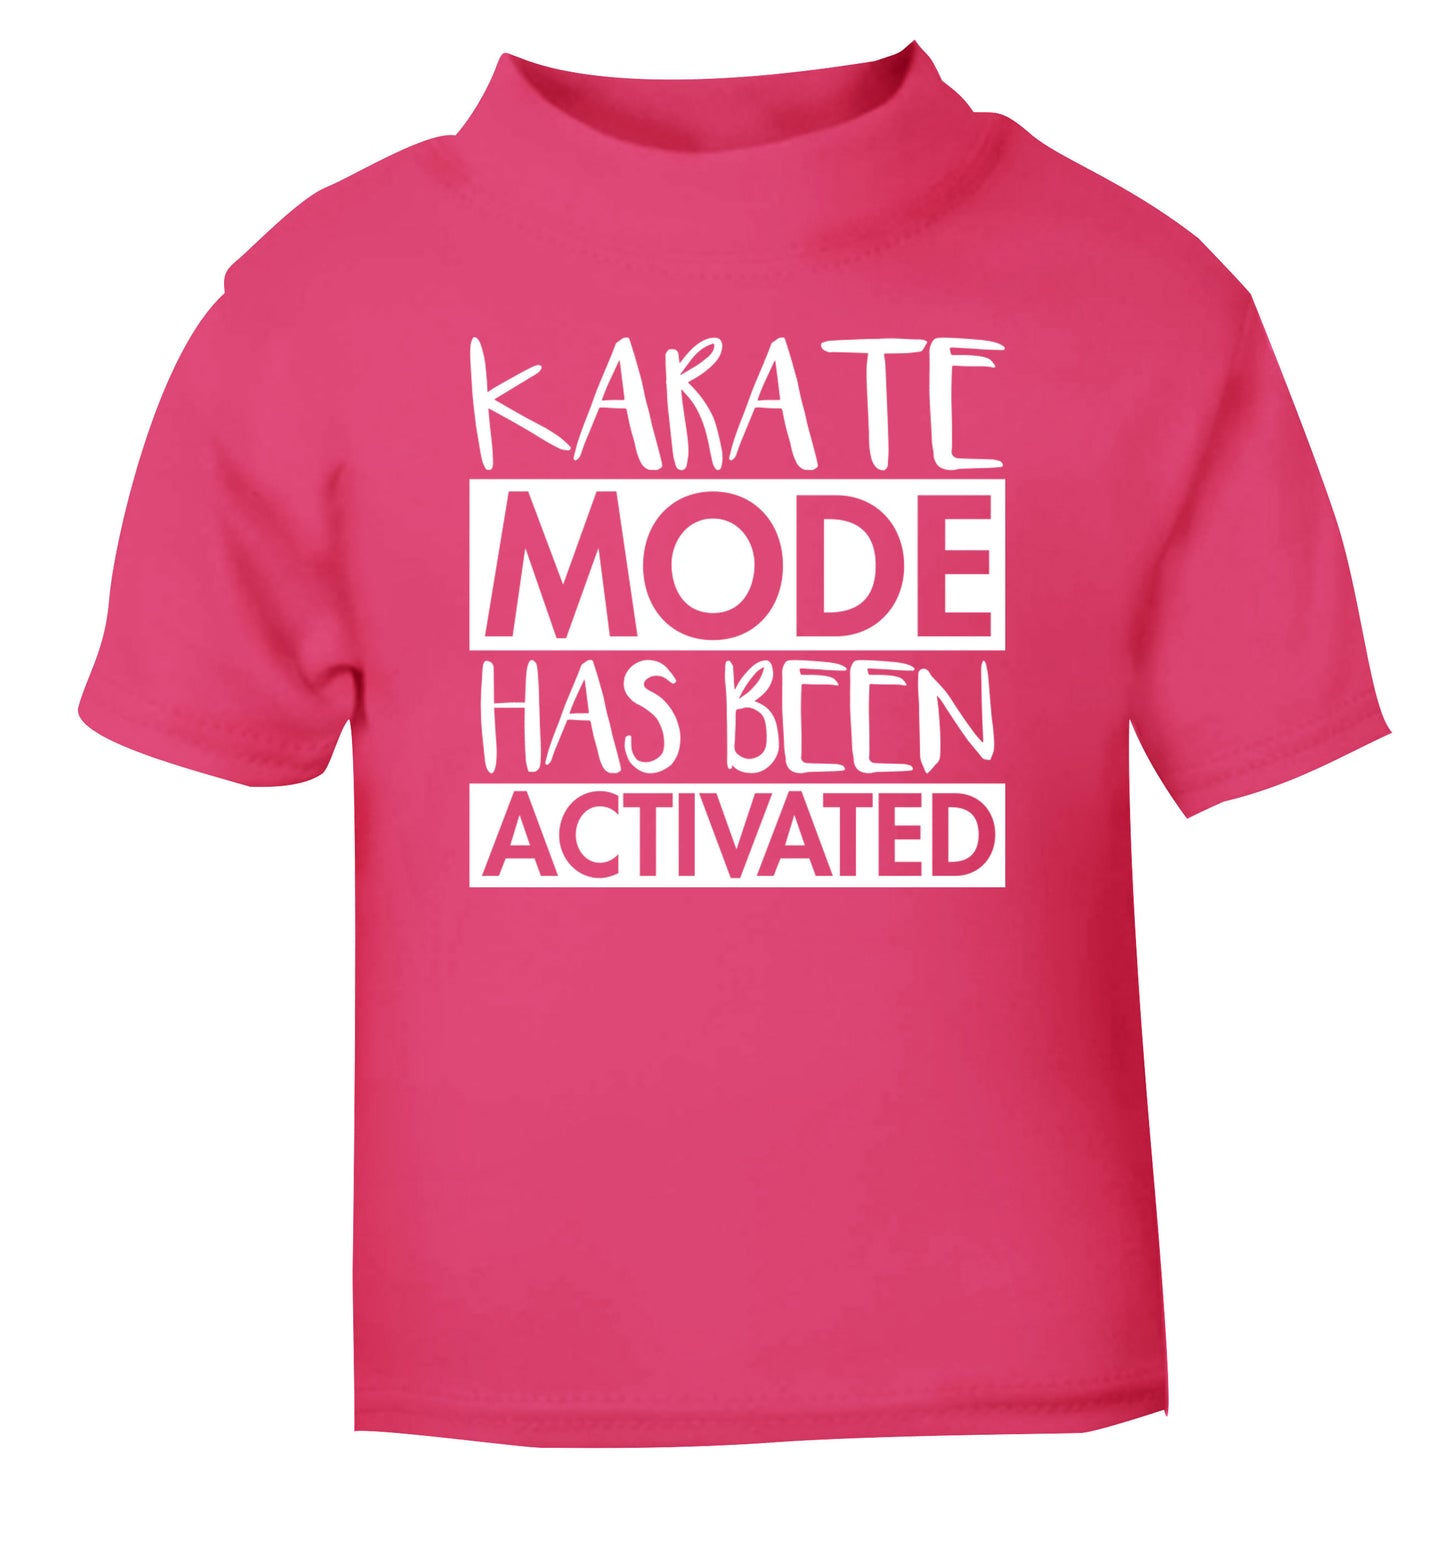 Karate mode activated pink Baby Toddler Tshirt 2 Years